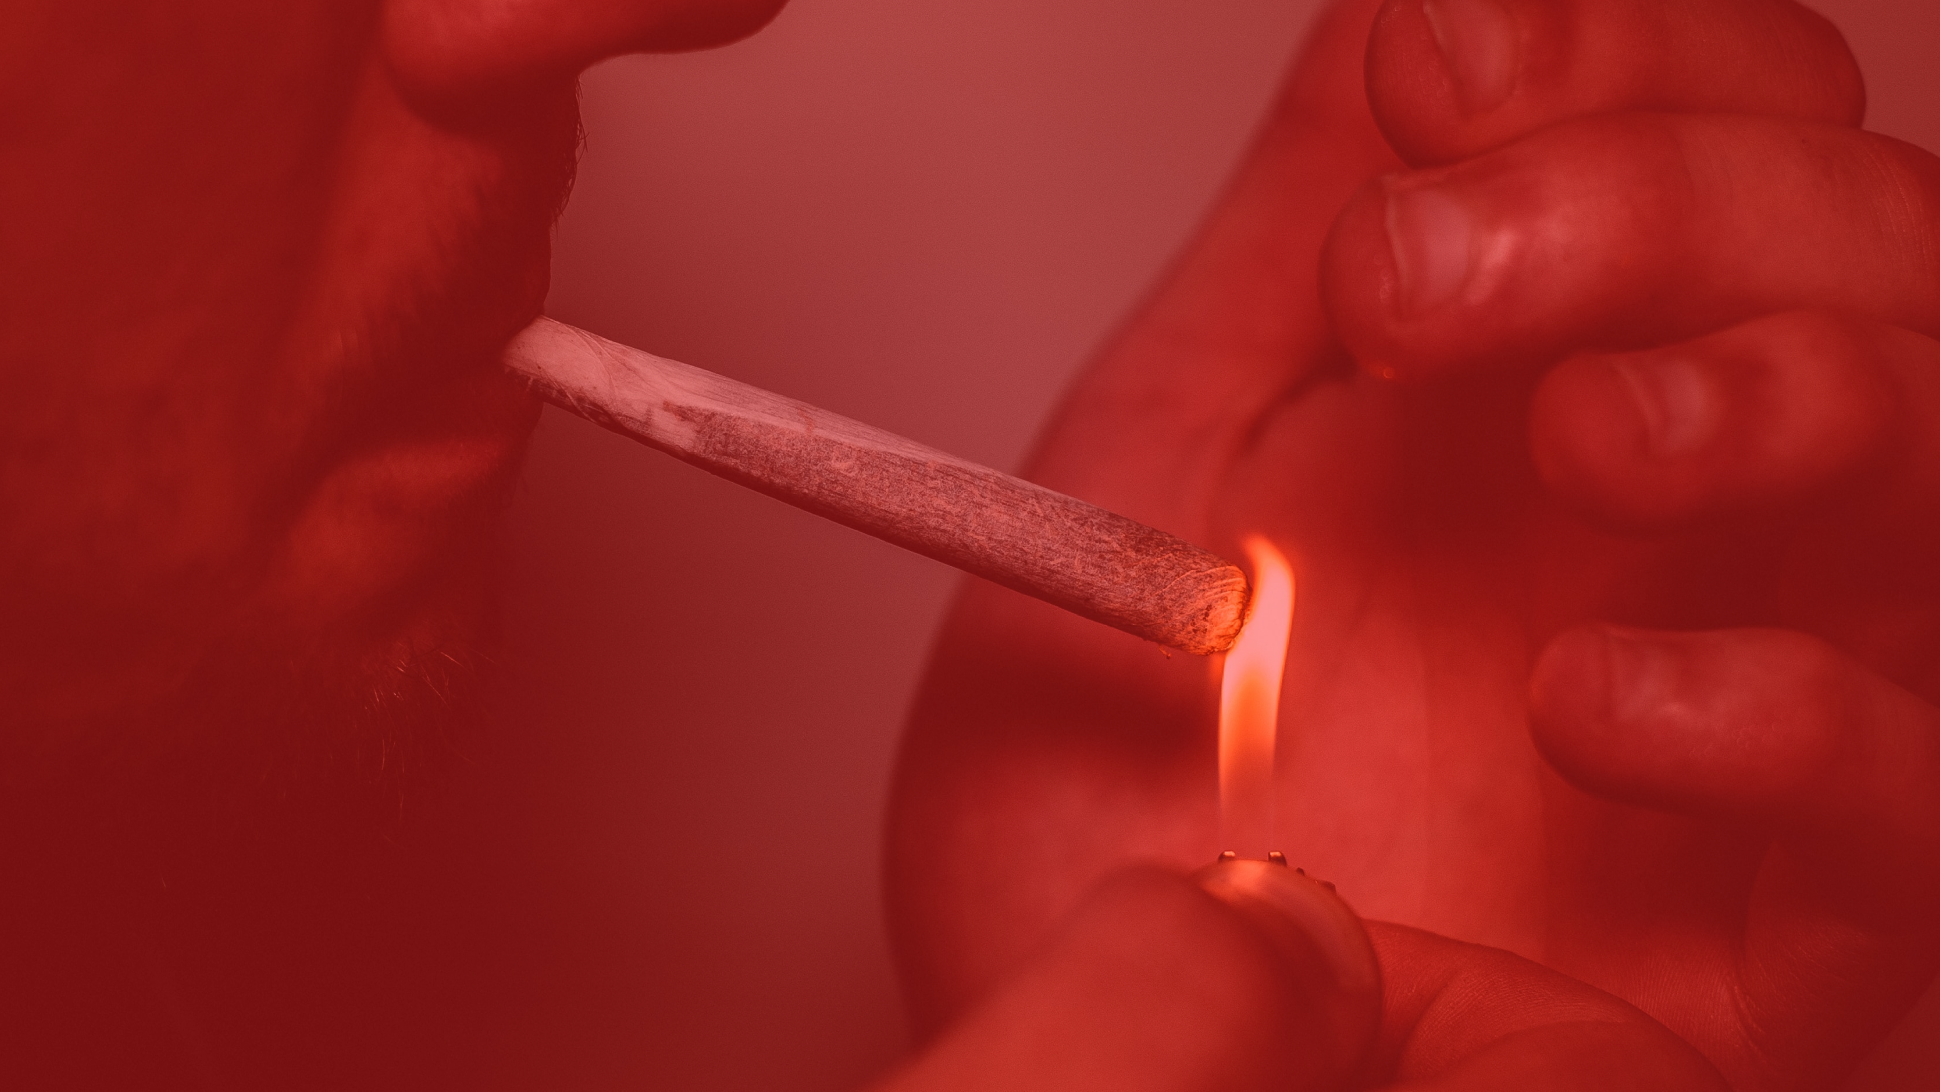 Let's get blunted! Learn How To Roll A Blunt